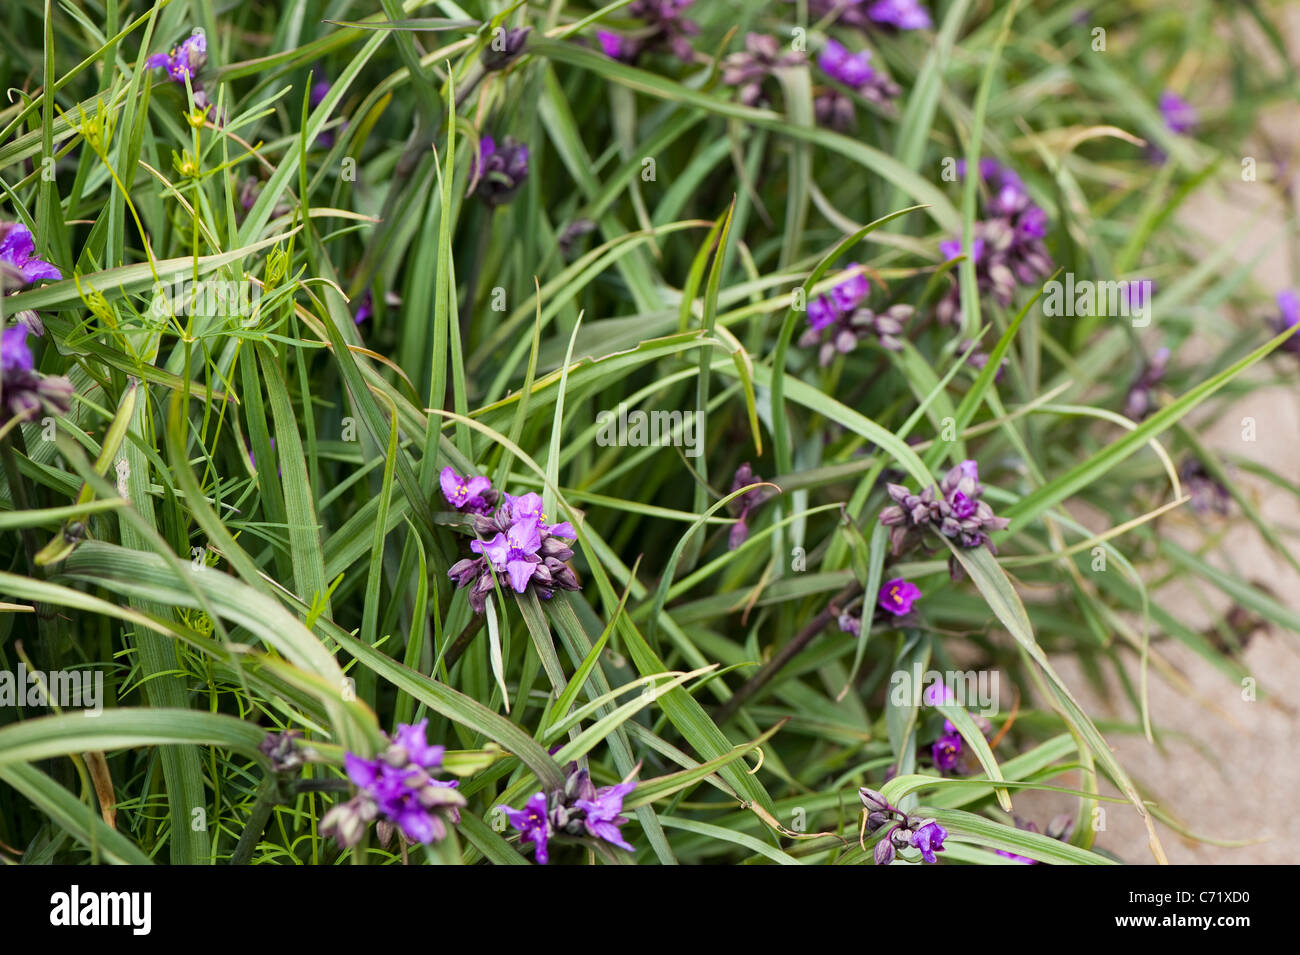 Tradescantia (Andersoniana Group) ‘Concord Grape’ in flower Stock Photo